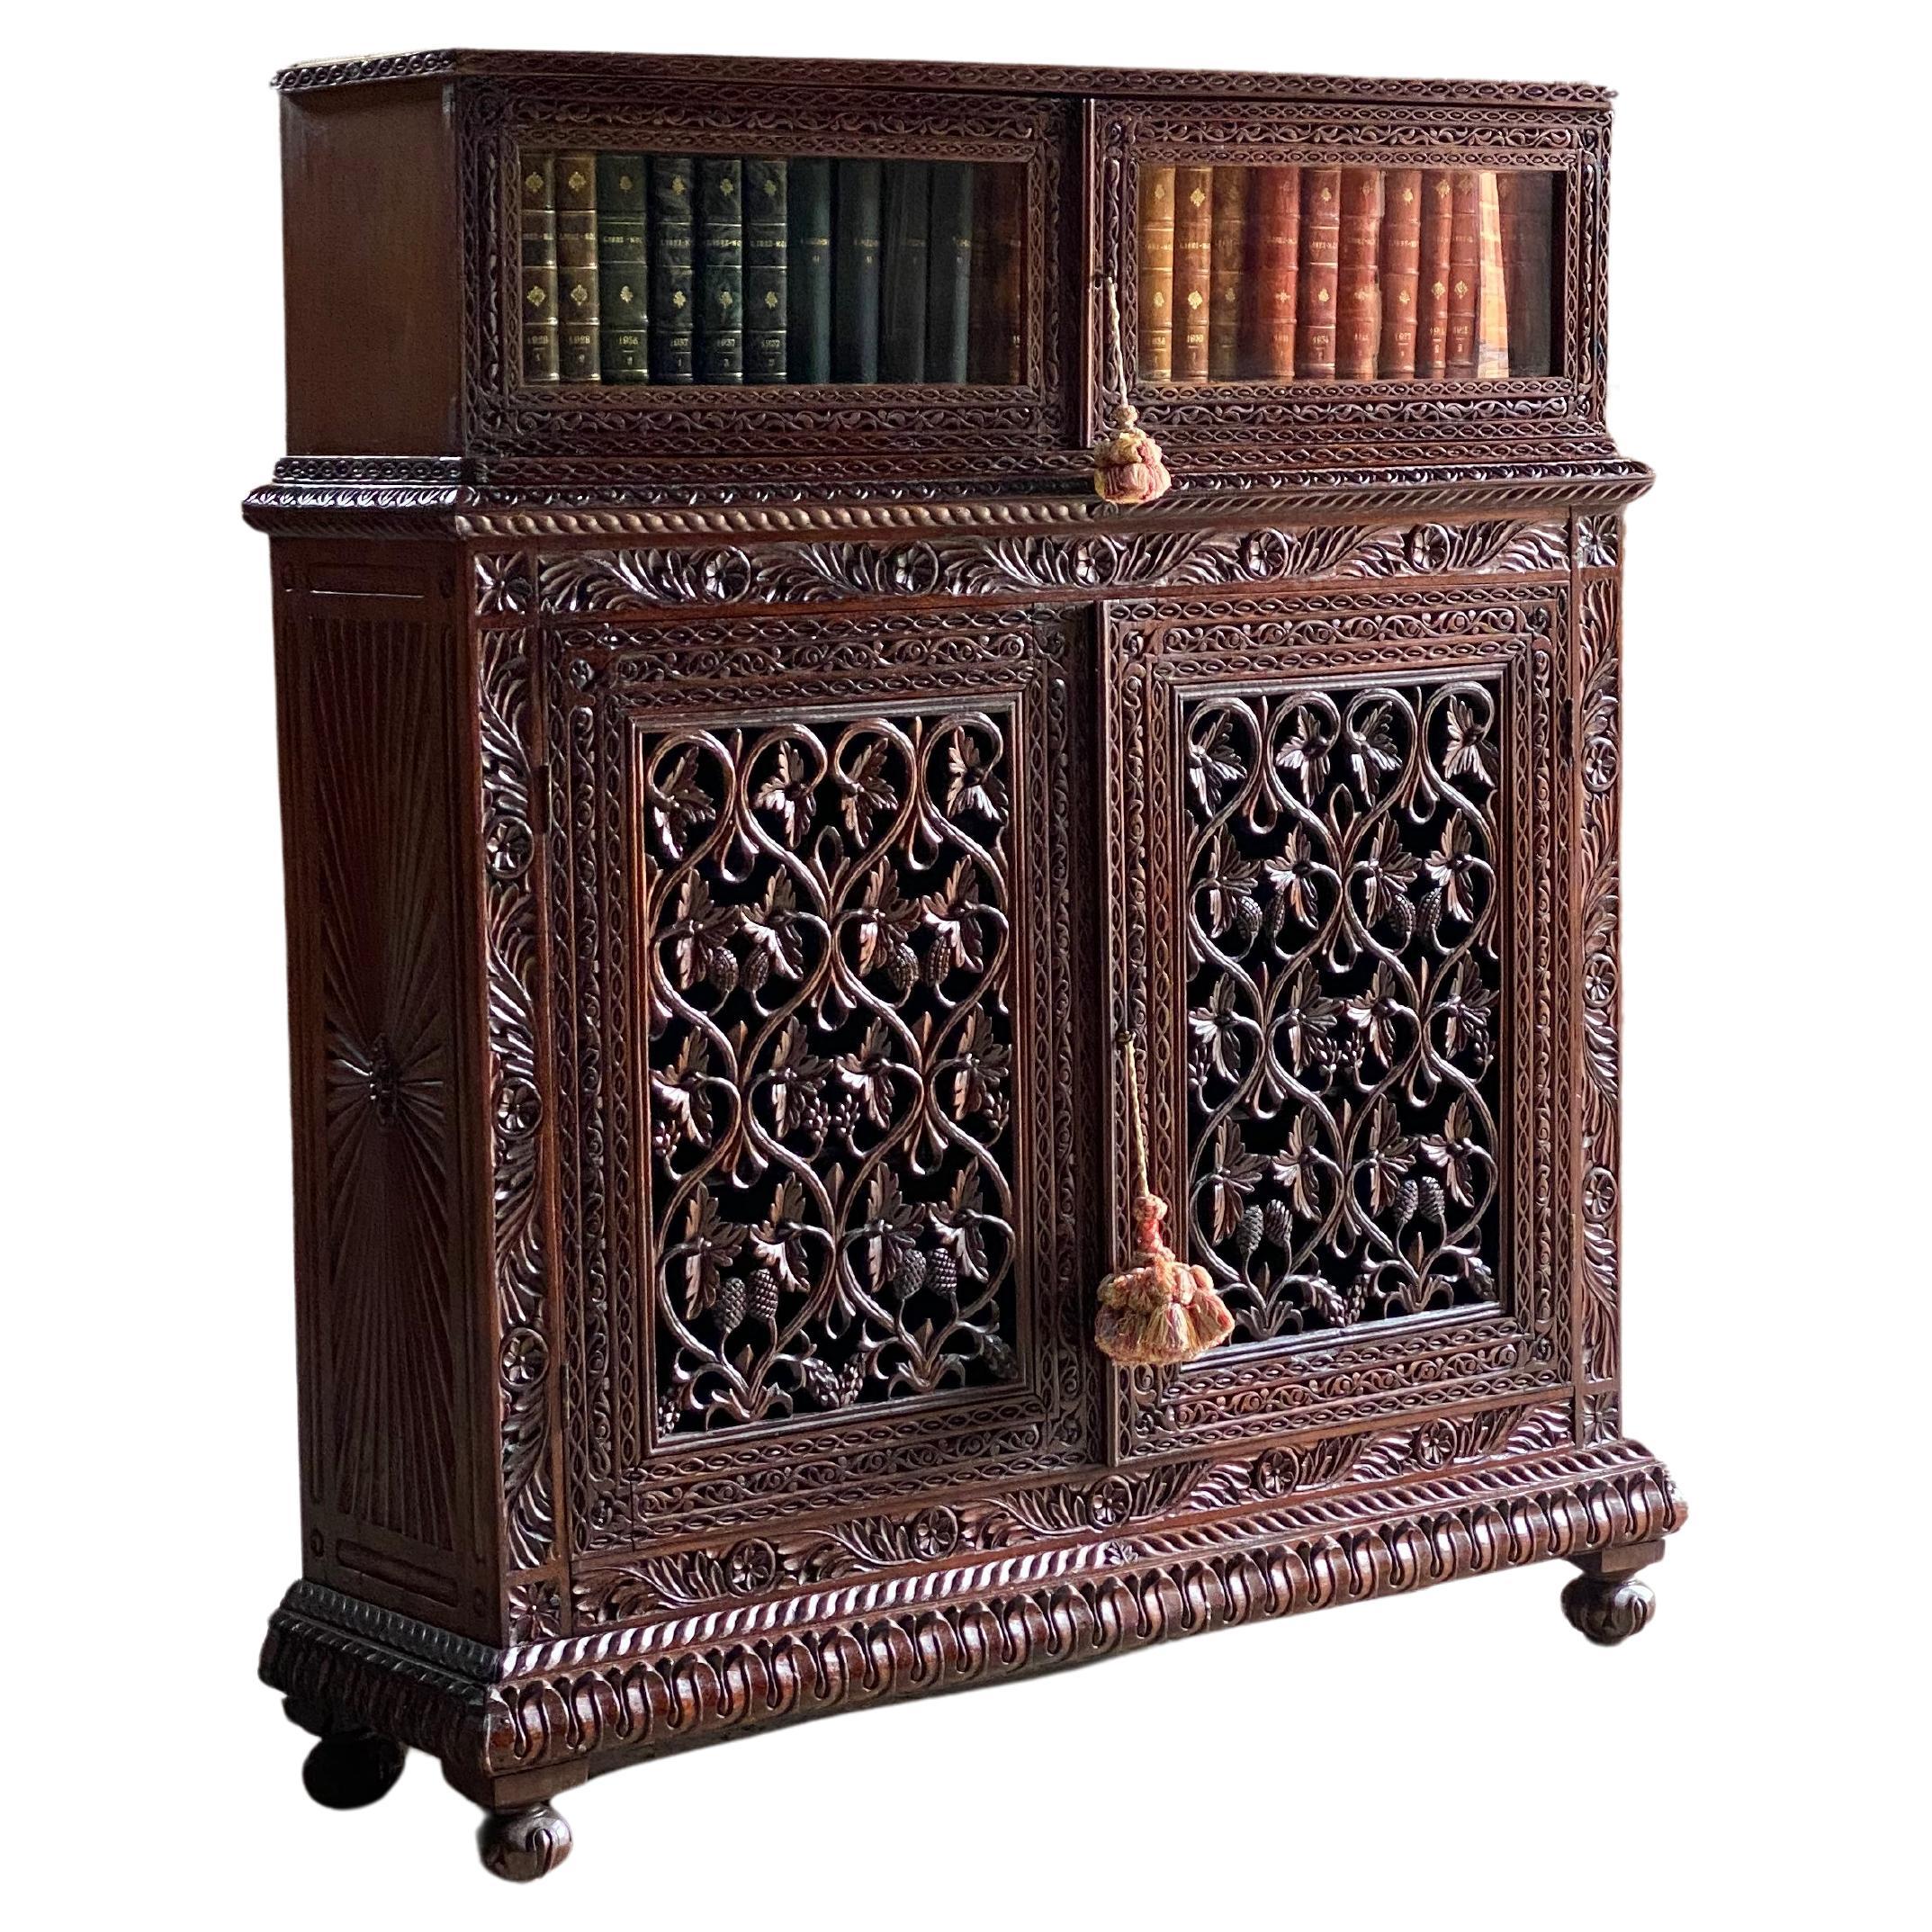 Antique Anglo-Indian Sunburst Teak bookcase cabinet Circa 1850

Stunning mid 19th century Anglo-Indian Teak Sunburst Bookcase Cabinet India circa 1850, made in two parts, all in solid teak, the brass galleried upper bookcase section carved and